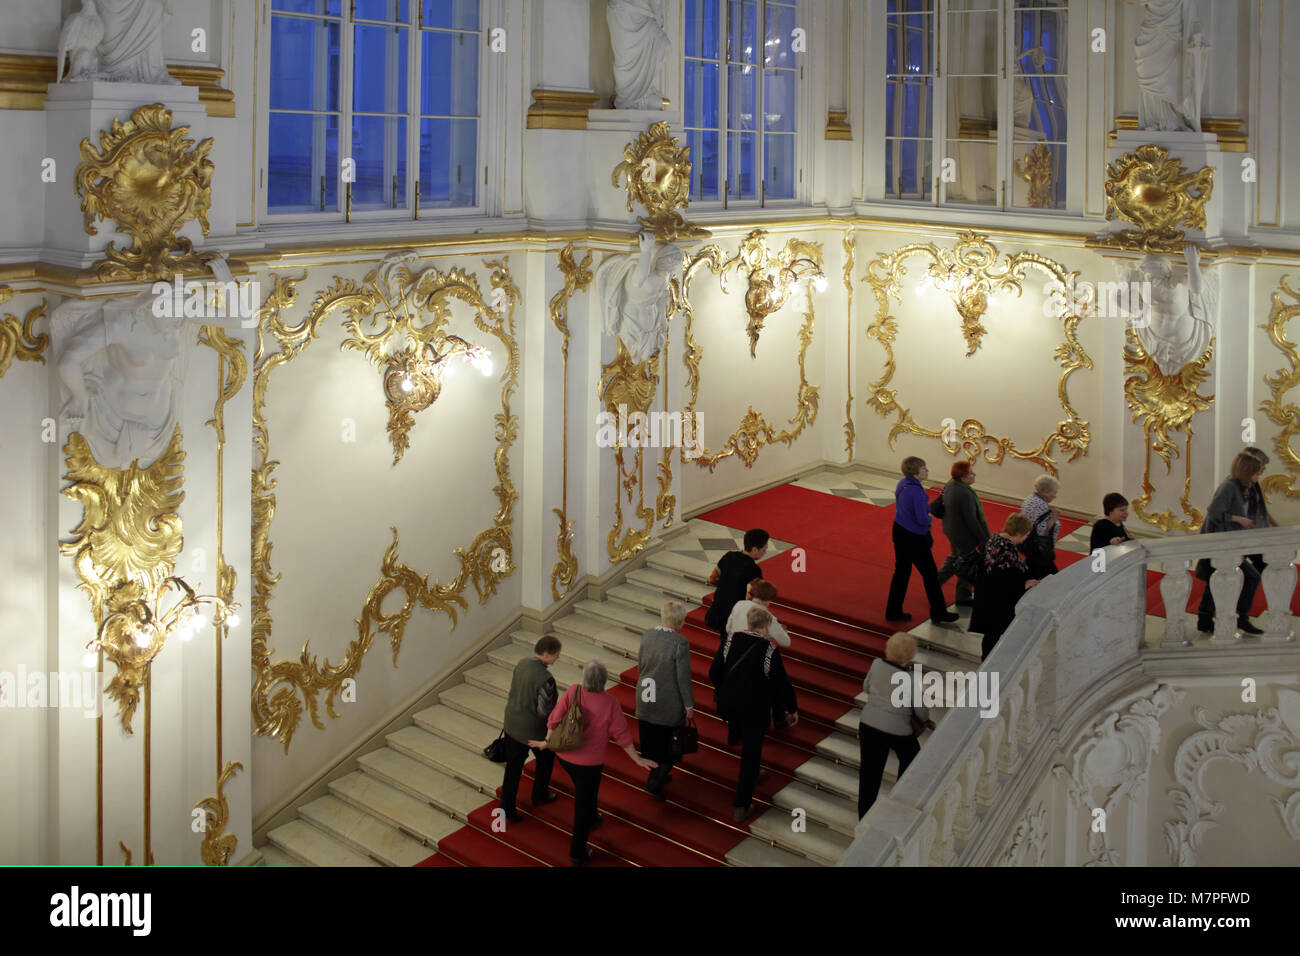 St. Petersburg, Russia - December 10, 2015: People admire the luxury interior of Winter Palace. Built in 1762 by design of Bartolomeo Francesco Rastre Stock Photo